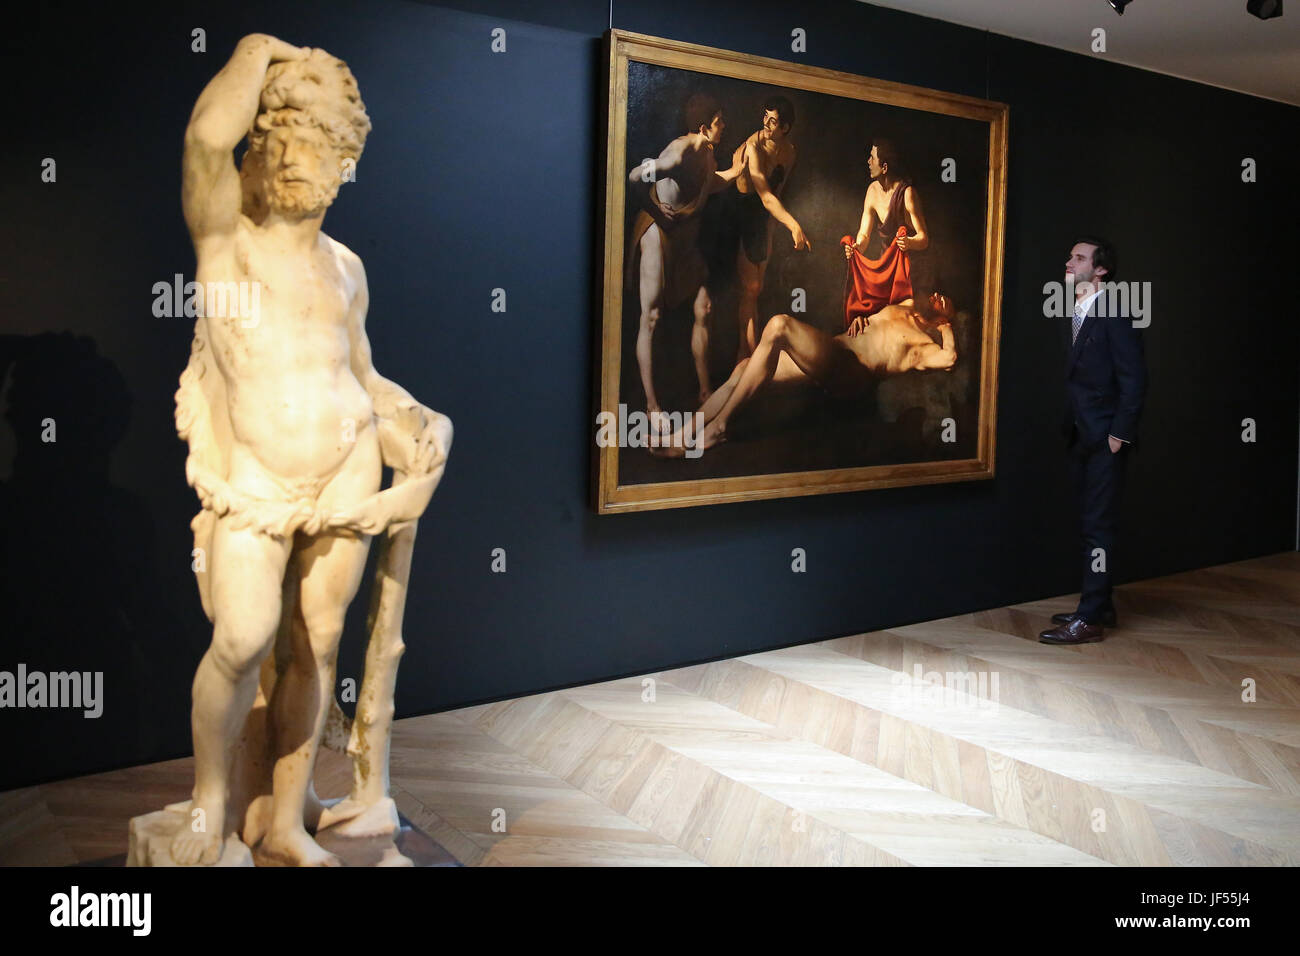 London, UK. 29th June, 2017. Paintings and sculptures on display at Colnaghi. London Art Week starts runs from 30 June to July 7 which will sees a range of art, from antiquities and Old Master paintings to work by renowned contemporary artists, from over 40 galleries on display. Credit: Dinendra Haria/Alamy Live News Stock Photo